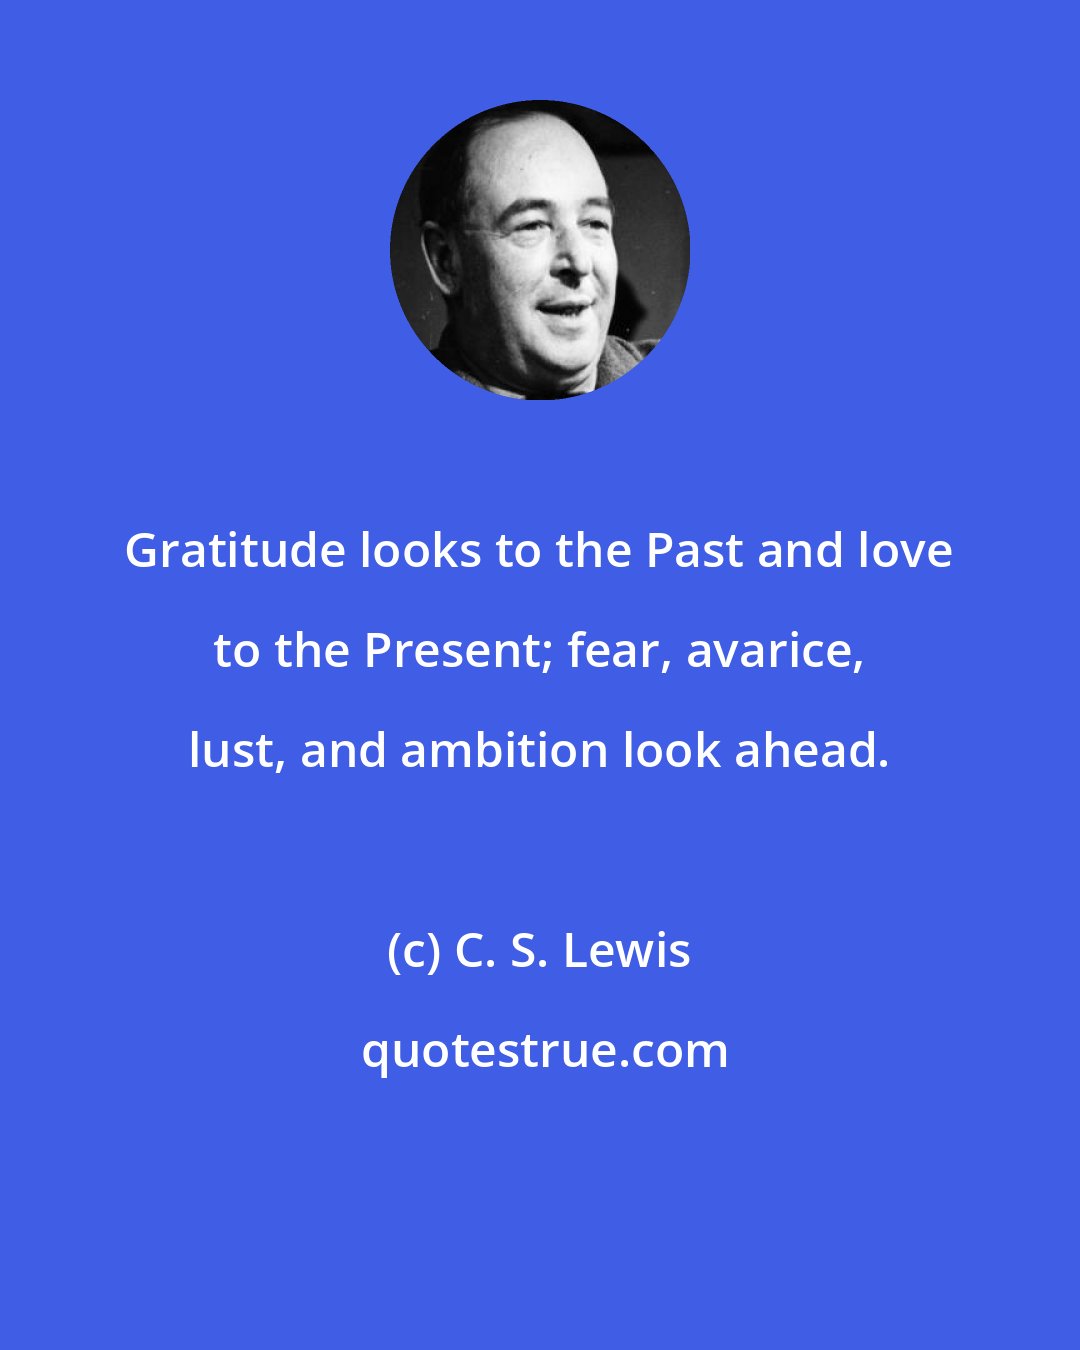 C. S. Lewis: Gratitude looks to the Past and love to the Present; fear, avarice, lust, and ambition look ahead.